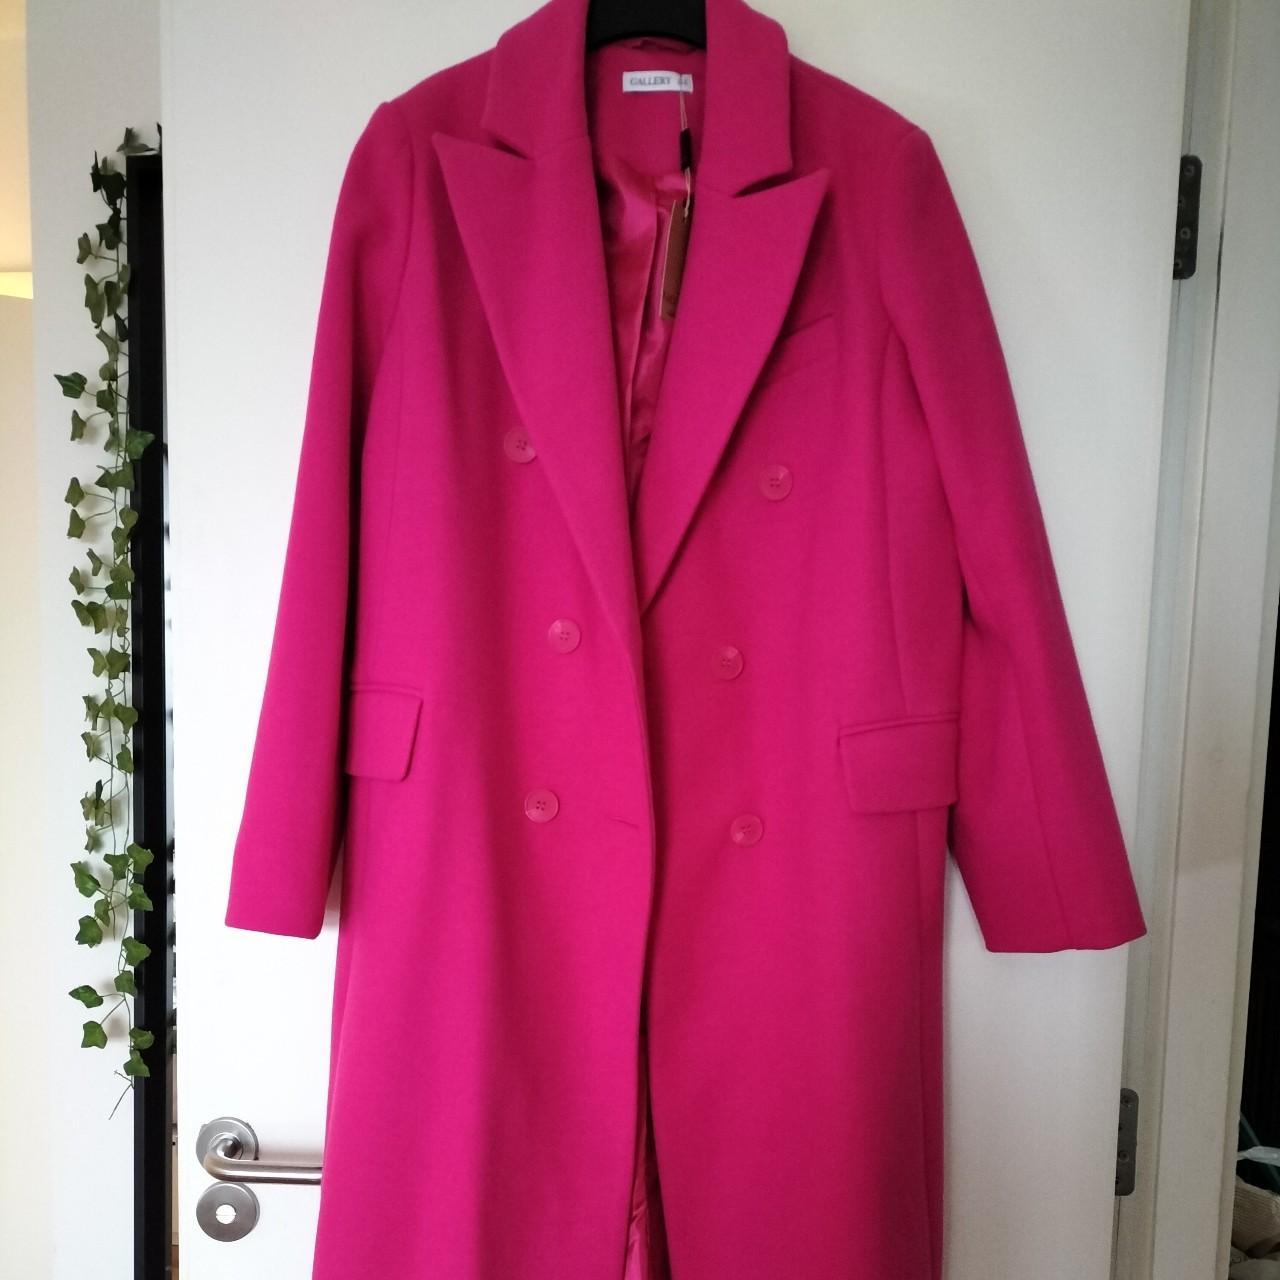 Beautiful long pink coat 💞 * Brand new with tags *... - Depop